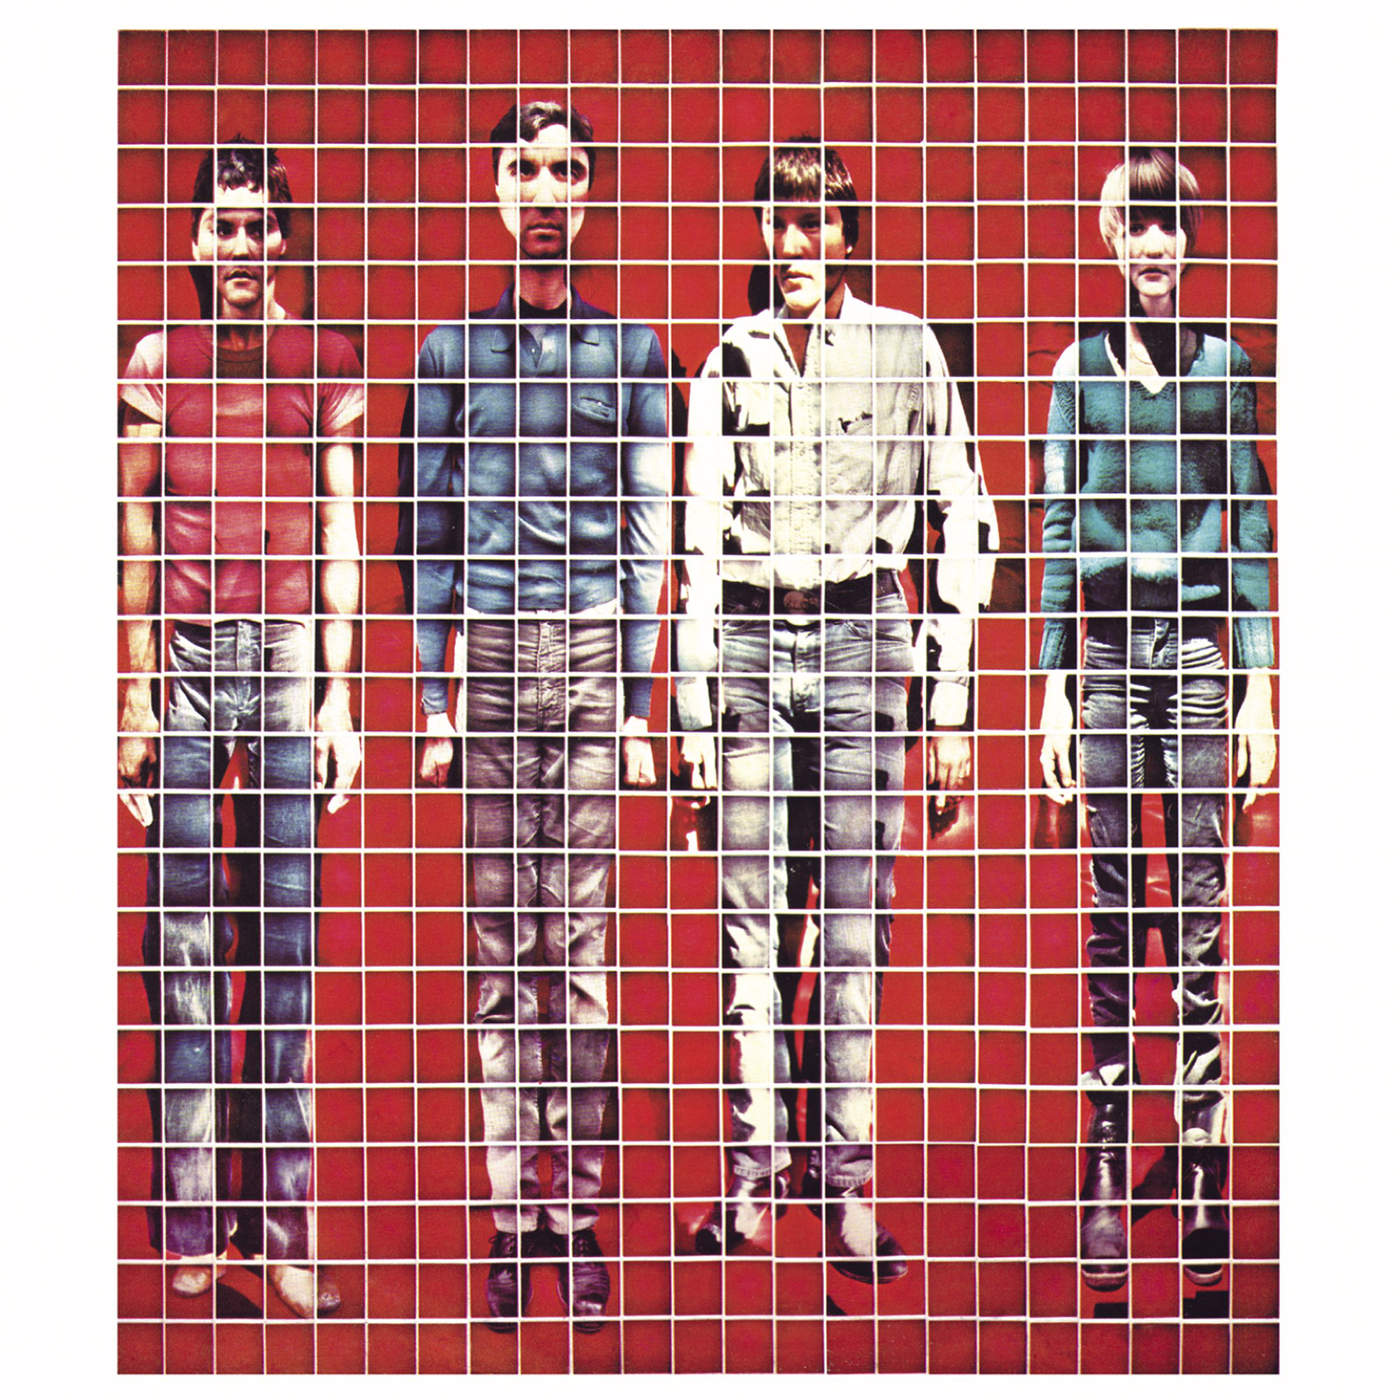 Art for Take Me to the River by Talking Heads